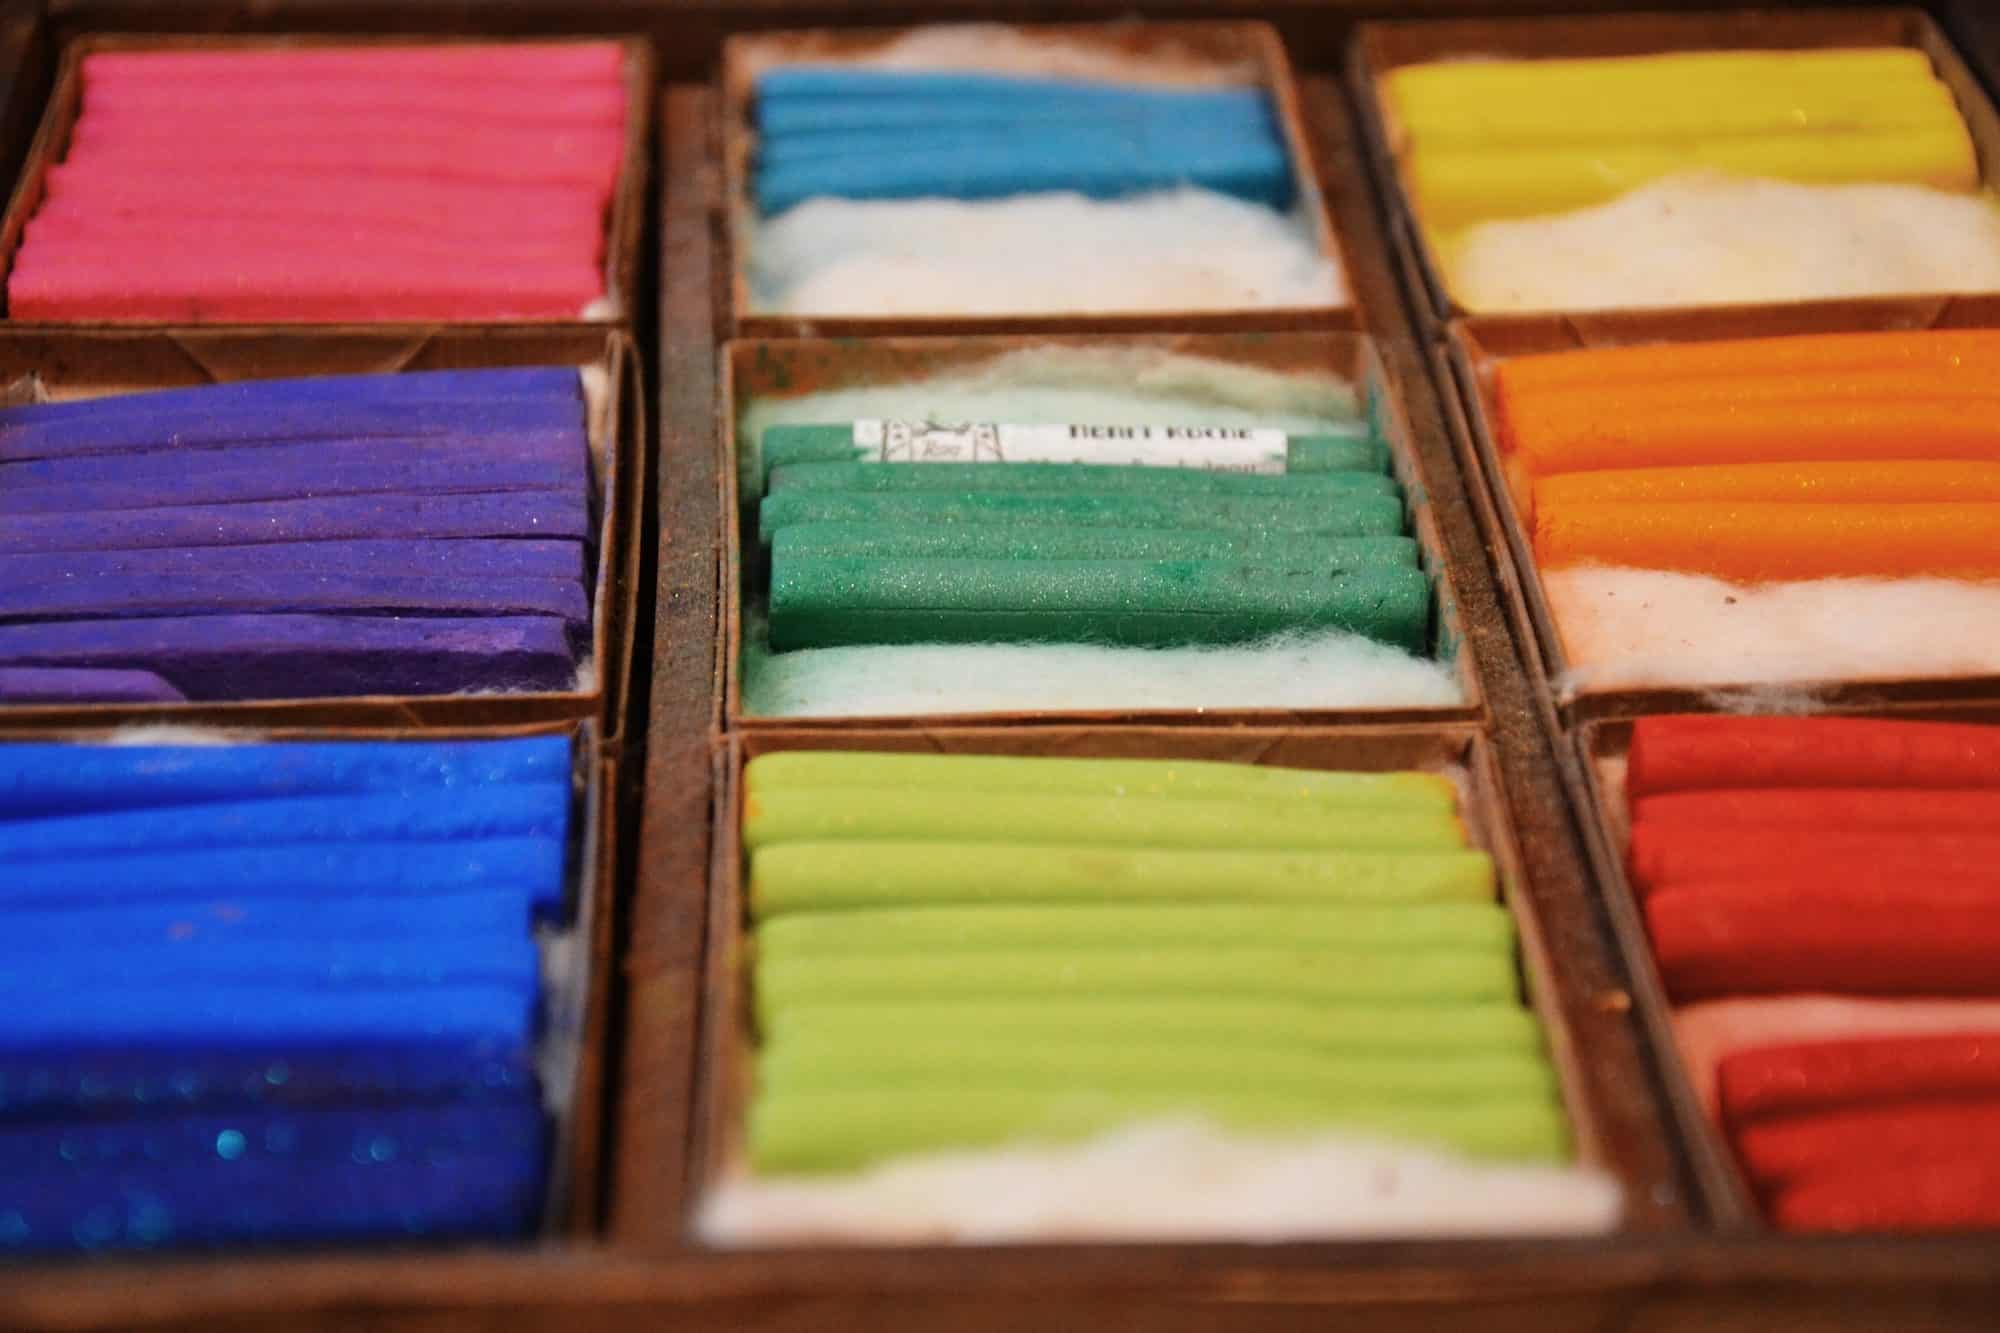 The historic Maison du Pastel shop is a feast of color in Paris and is a go-to for artists from all over the world.